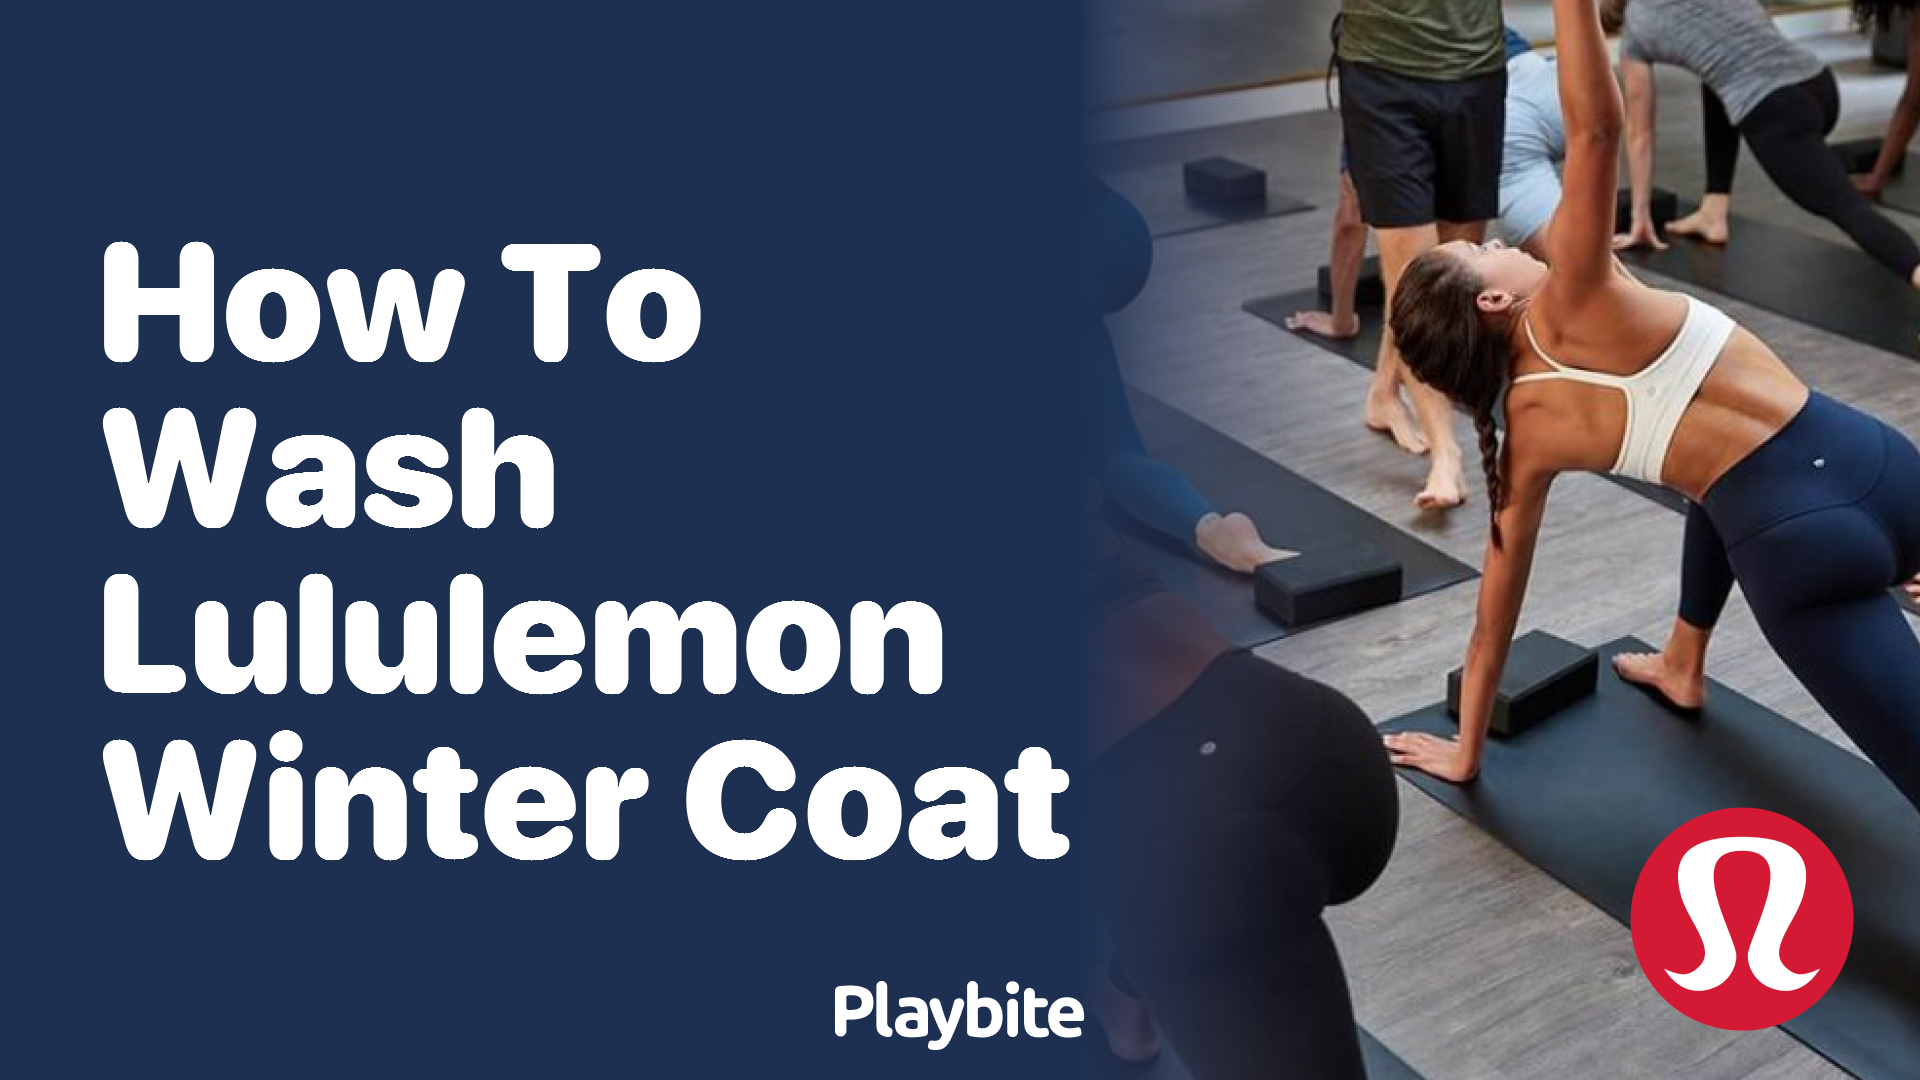 Can You Bleach Lululemon Clothes? Find Out Here! - Playbite